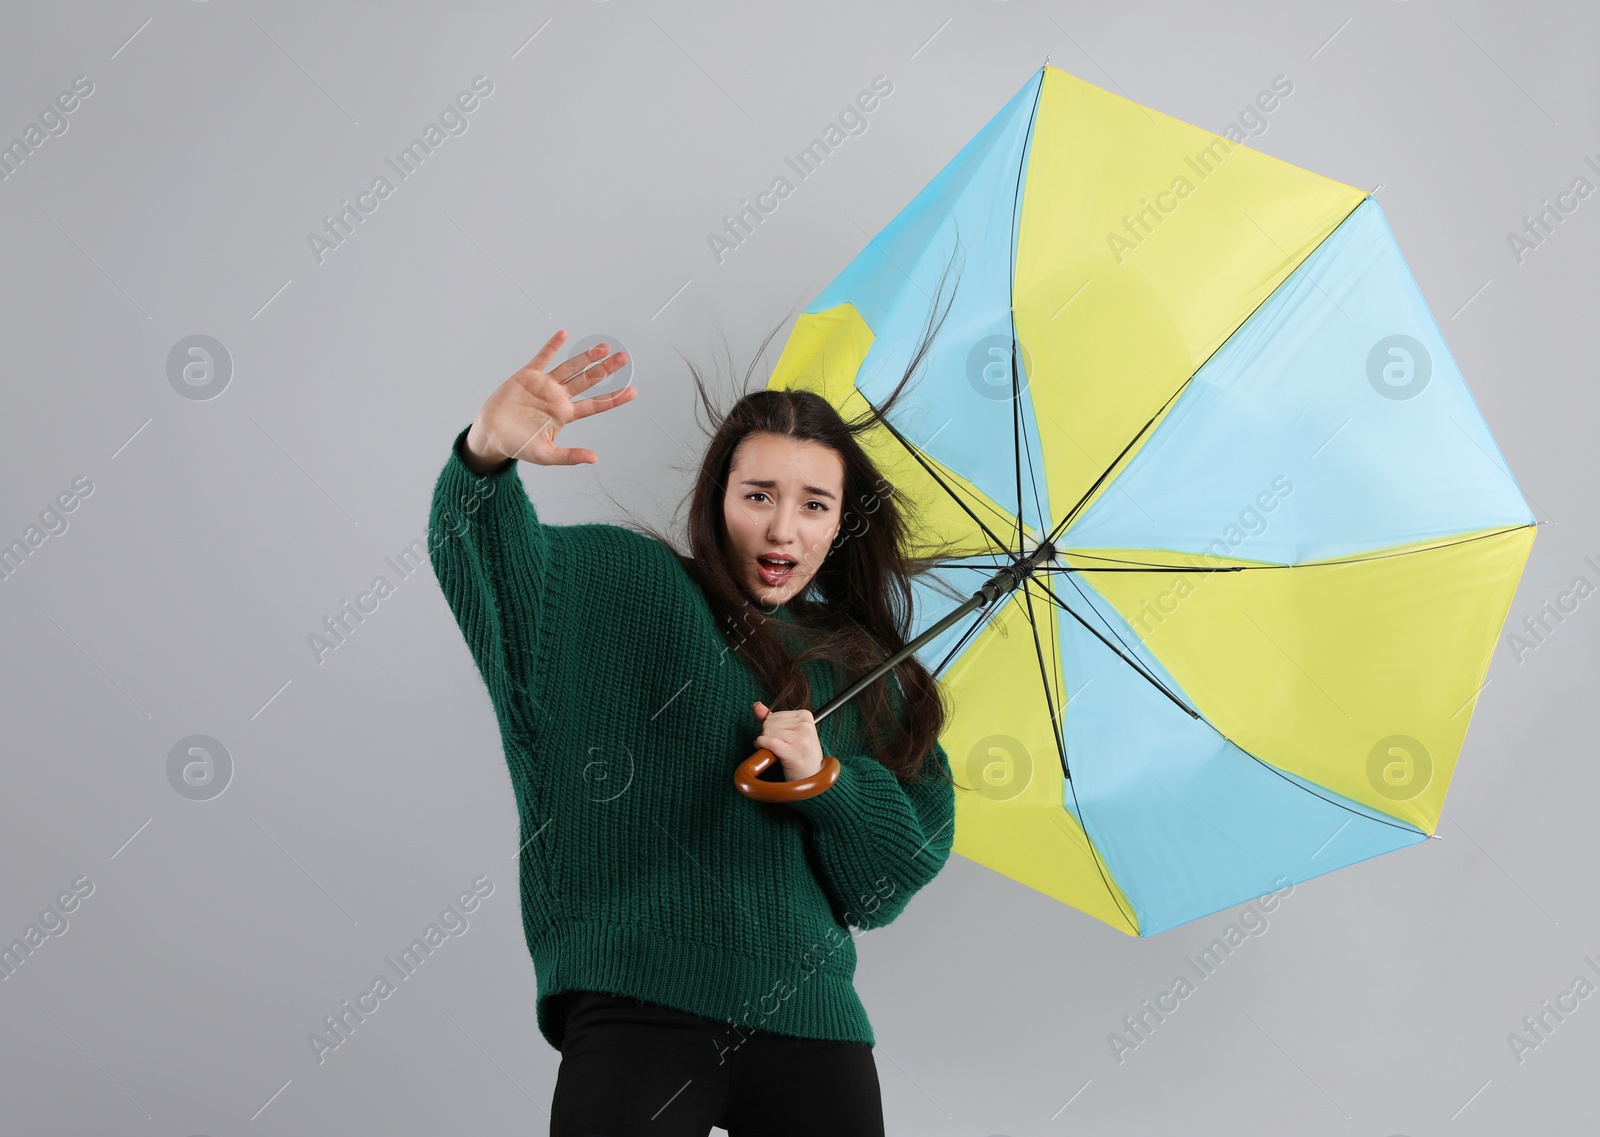 Photo of Emotional woman with umbrella caught in gust of wind on grey background